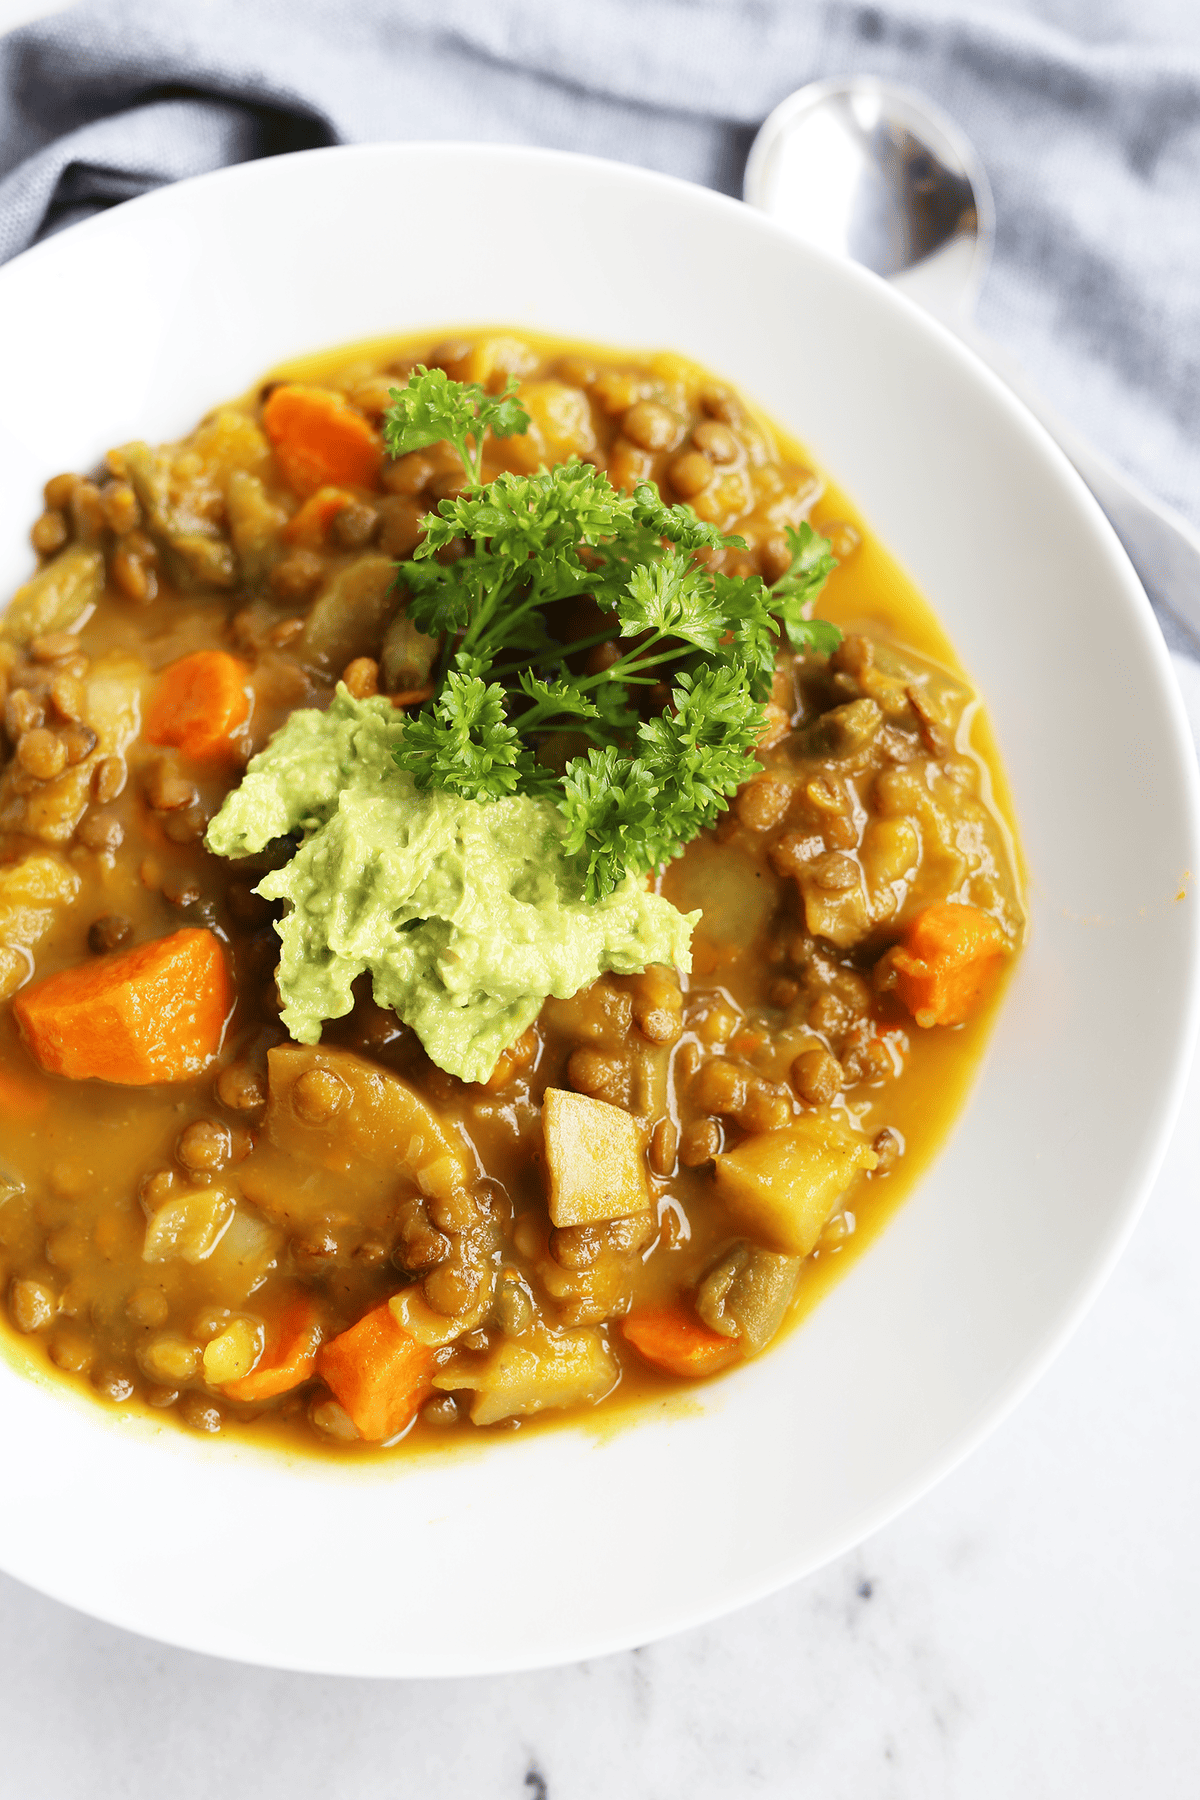 This homemade Pumpkin Lentil Soup is easy and super hearty packed with carrots, potatoes and full of fresh flavors! Vegan and gluten free.